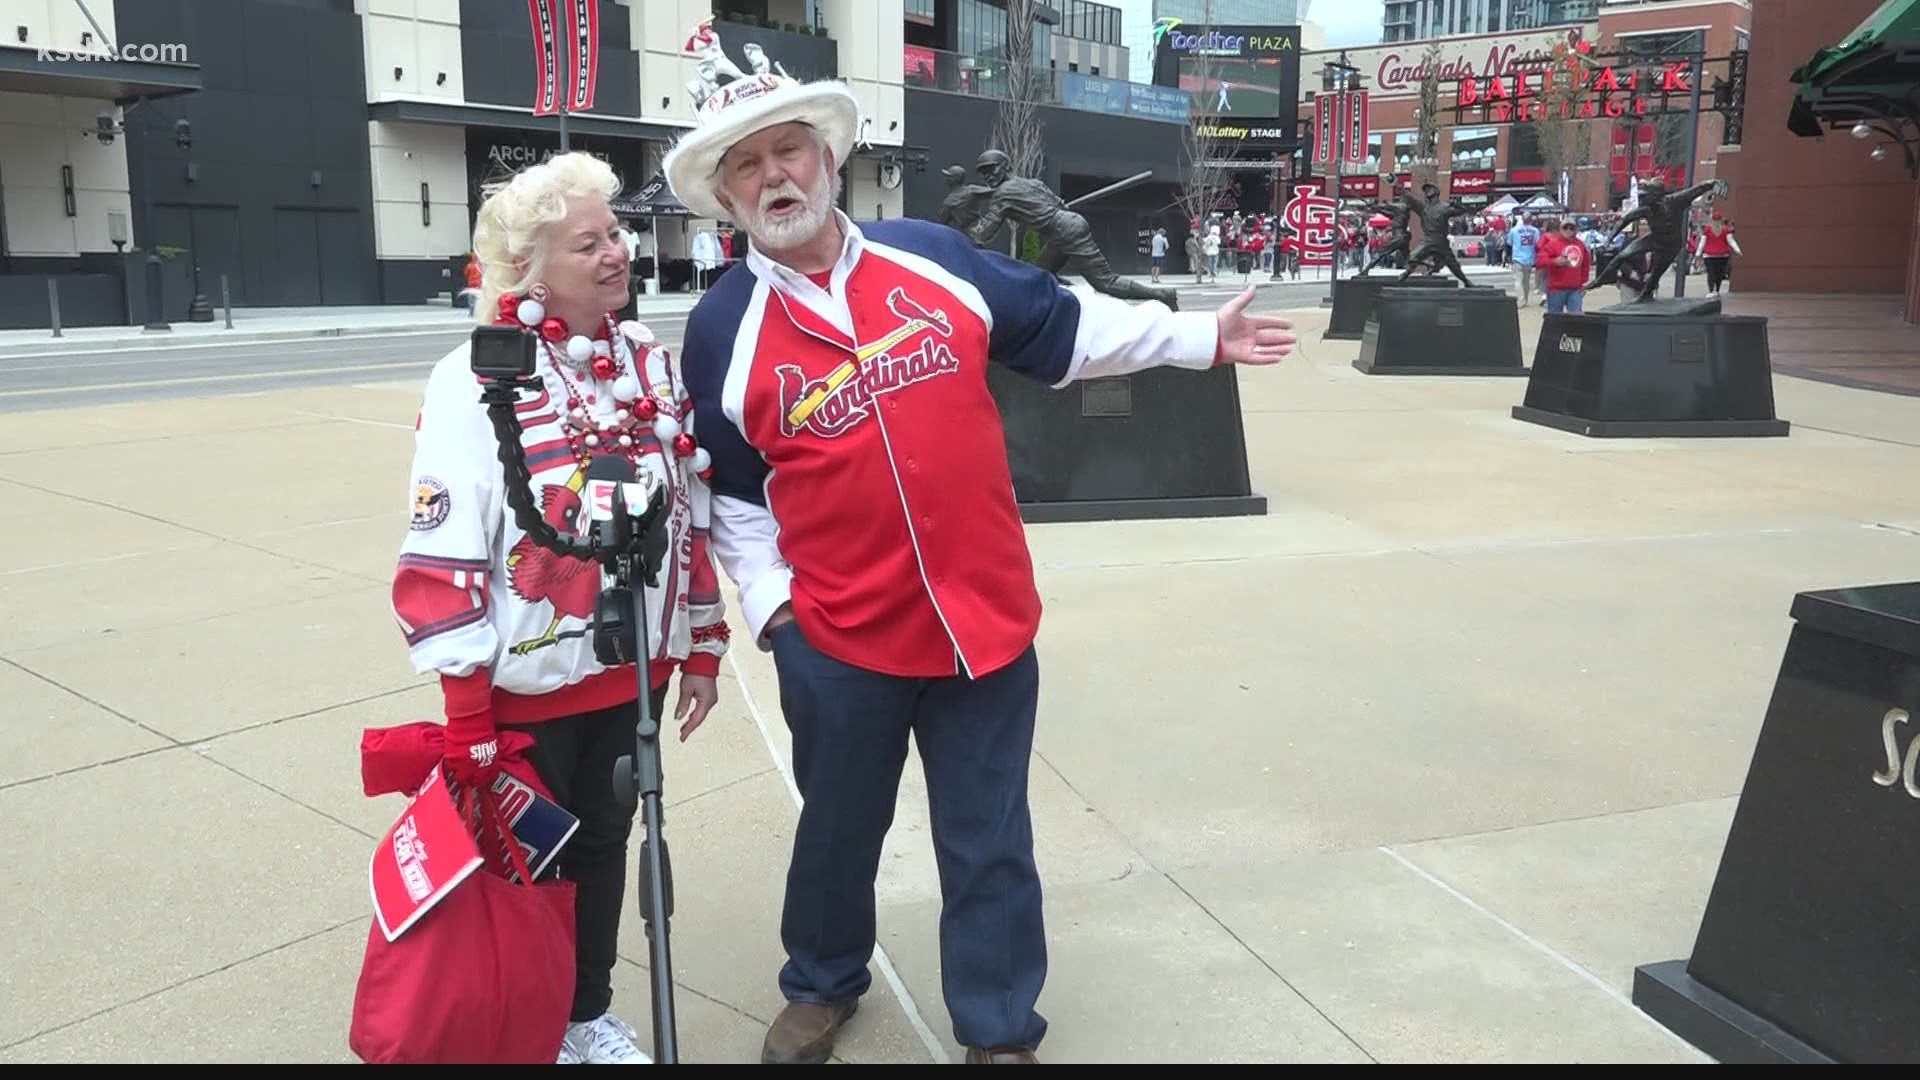 It's the day baseball fans have been waiting for: the Cardinals home opener at Busch Stadium!